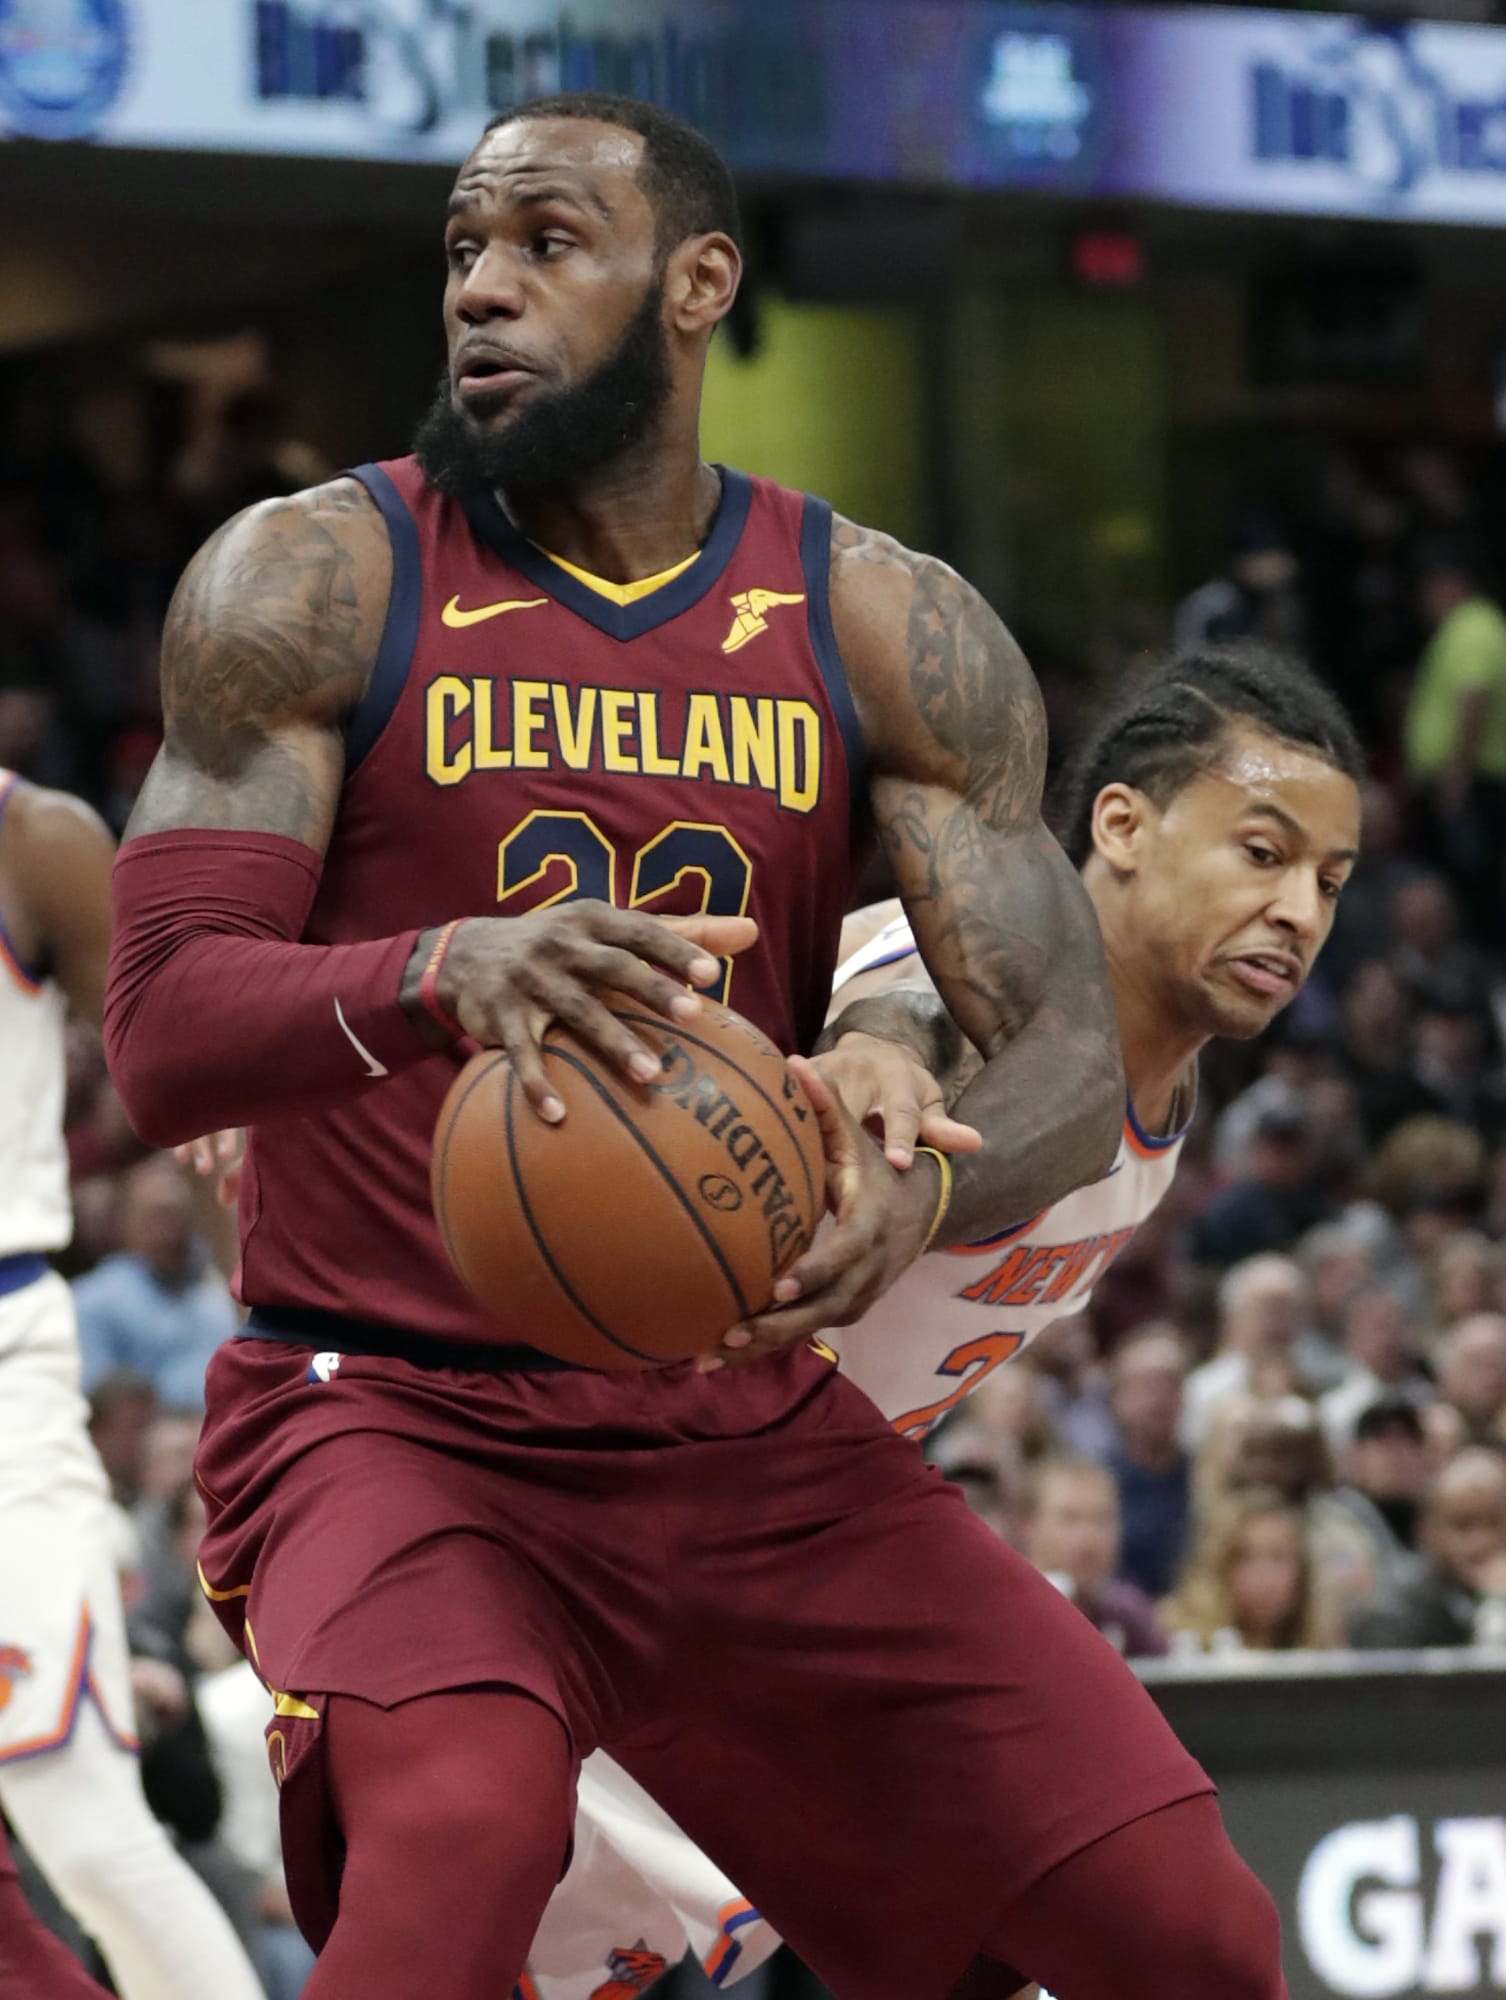 Cleveland Cavaliers' LeBron James, left, drives past New York Knicks' Trey Burke in the first half of an NBA basketball game, Wednesday, April 11, 2018, in Cleveland.